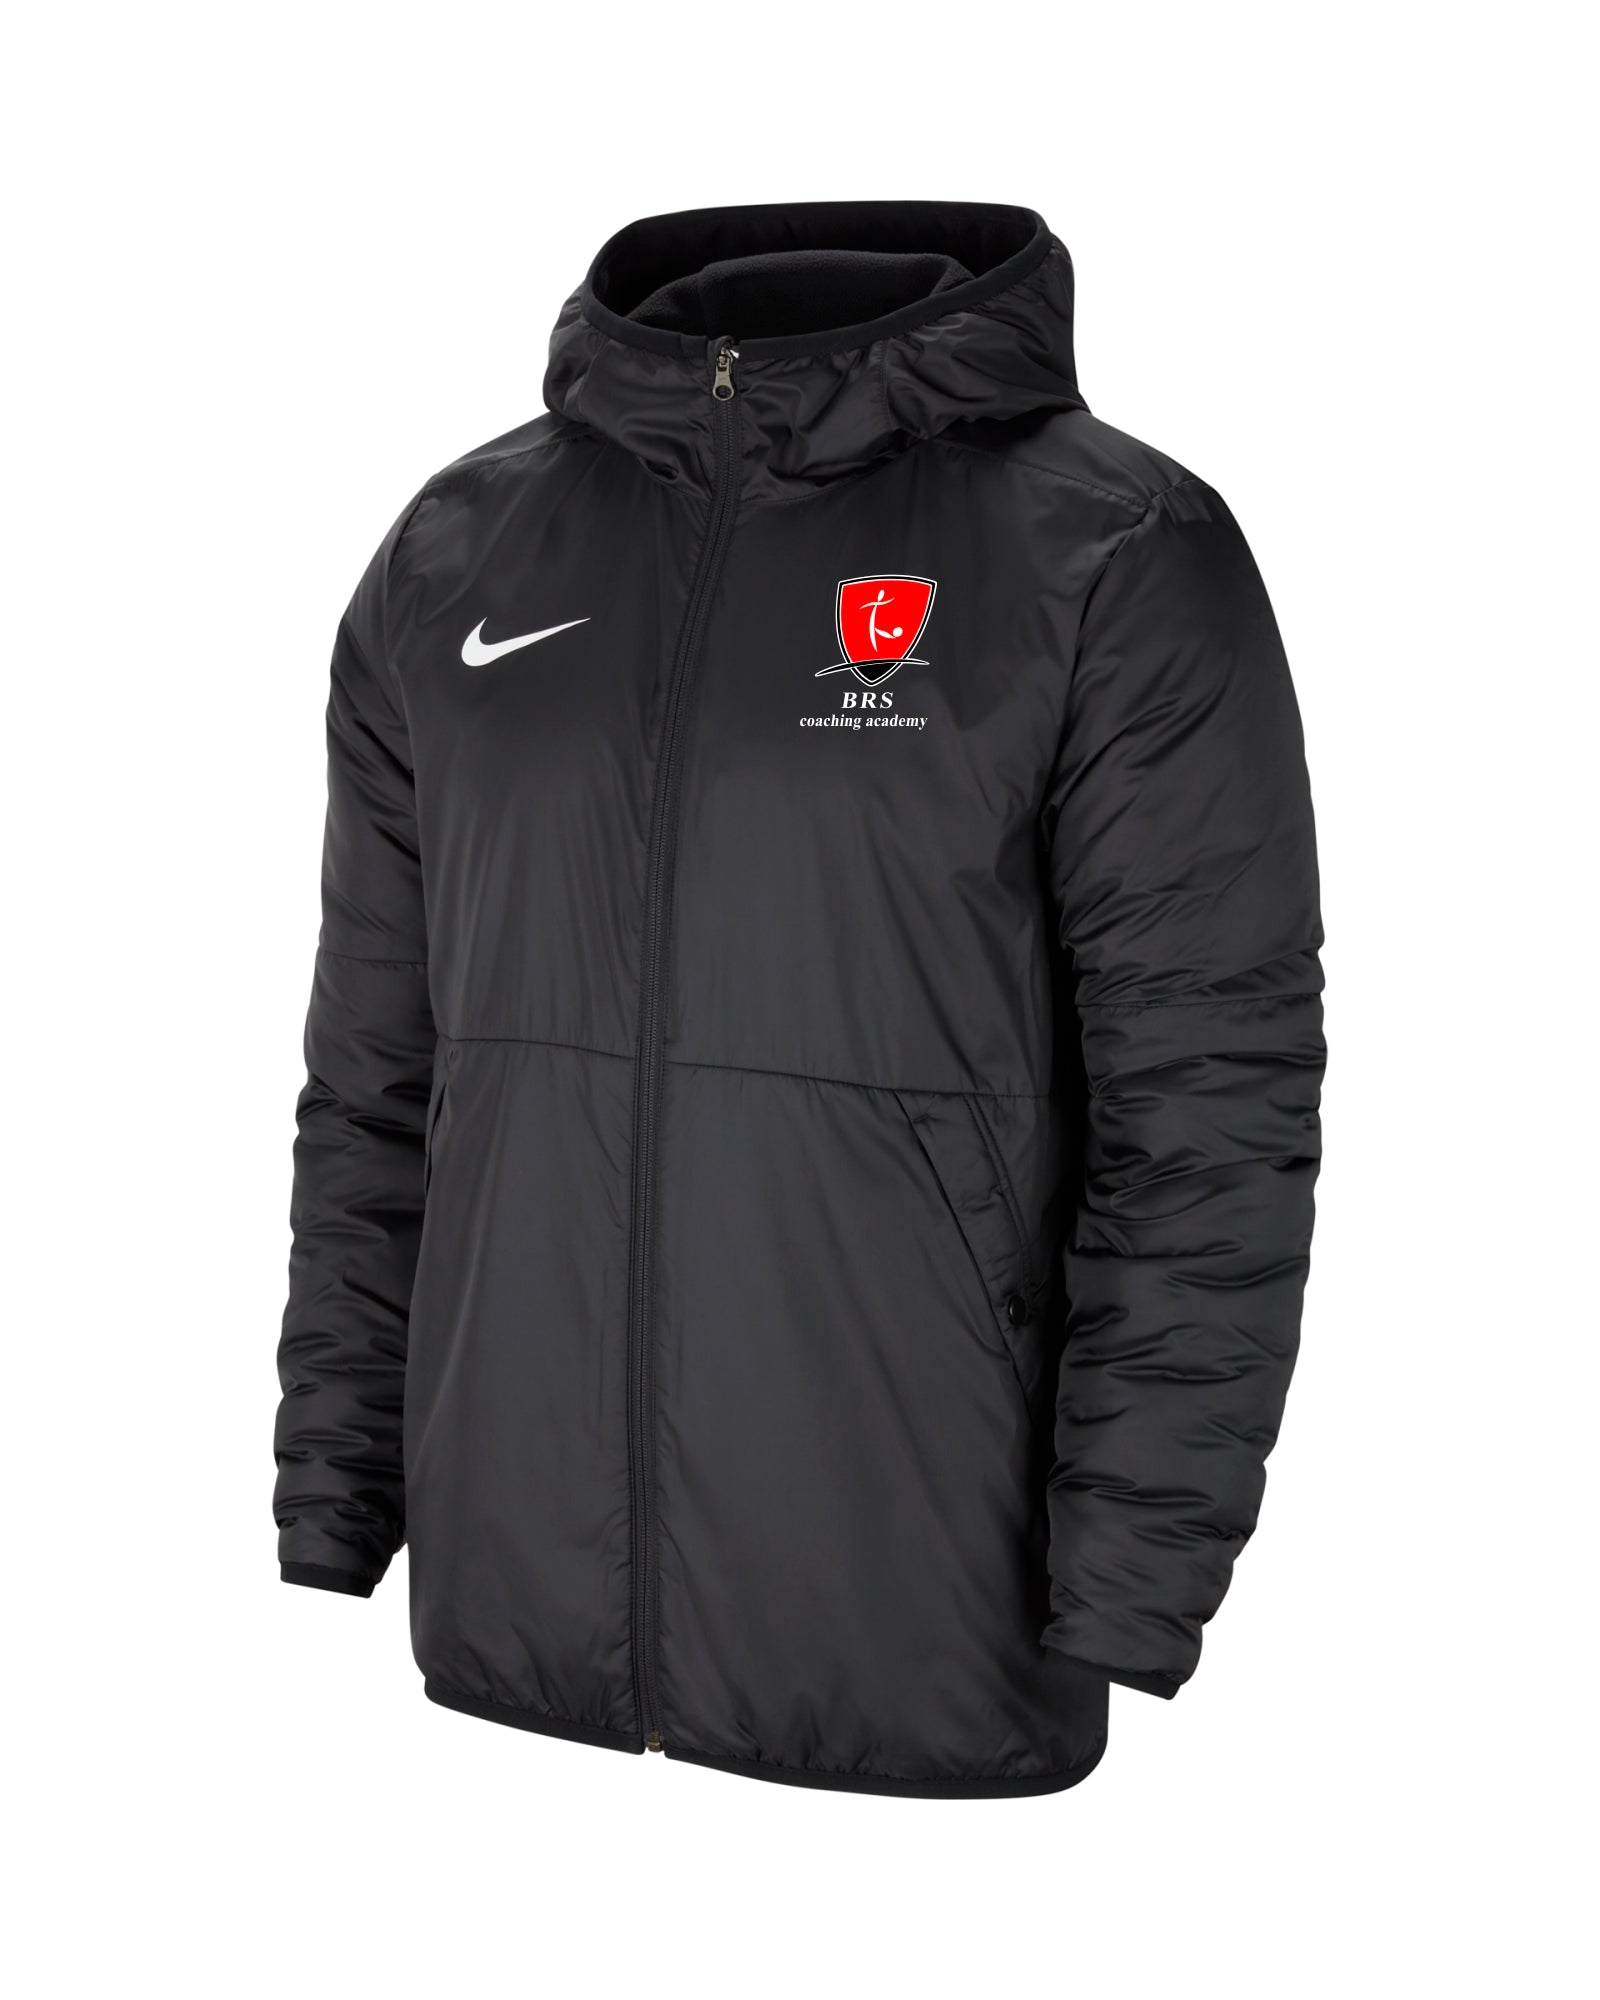 BRS Coaches - Nike Thermal Fall Jacket